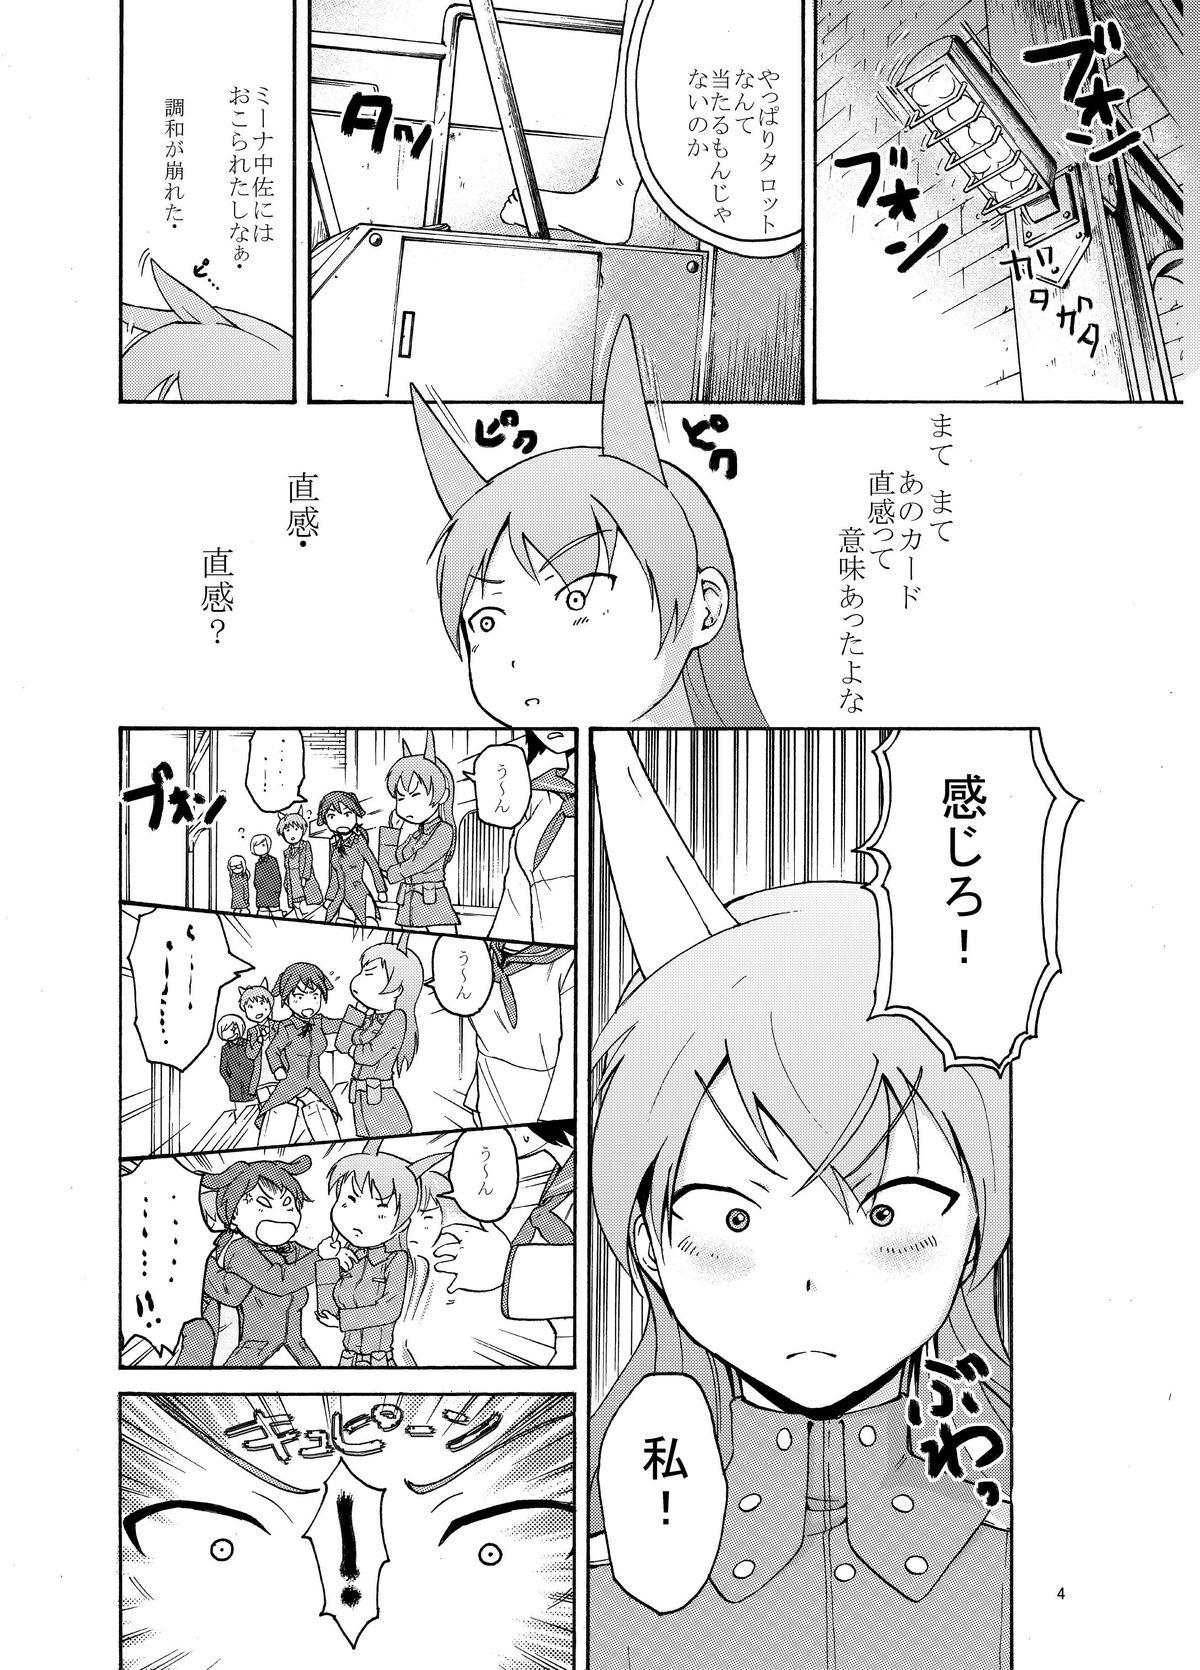 Ruiva Eila no Lovers Tarot - Strike witches Plug - Page 5